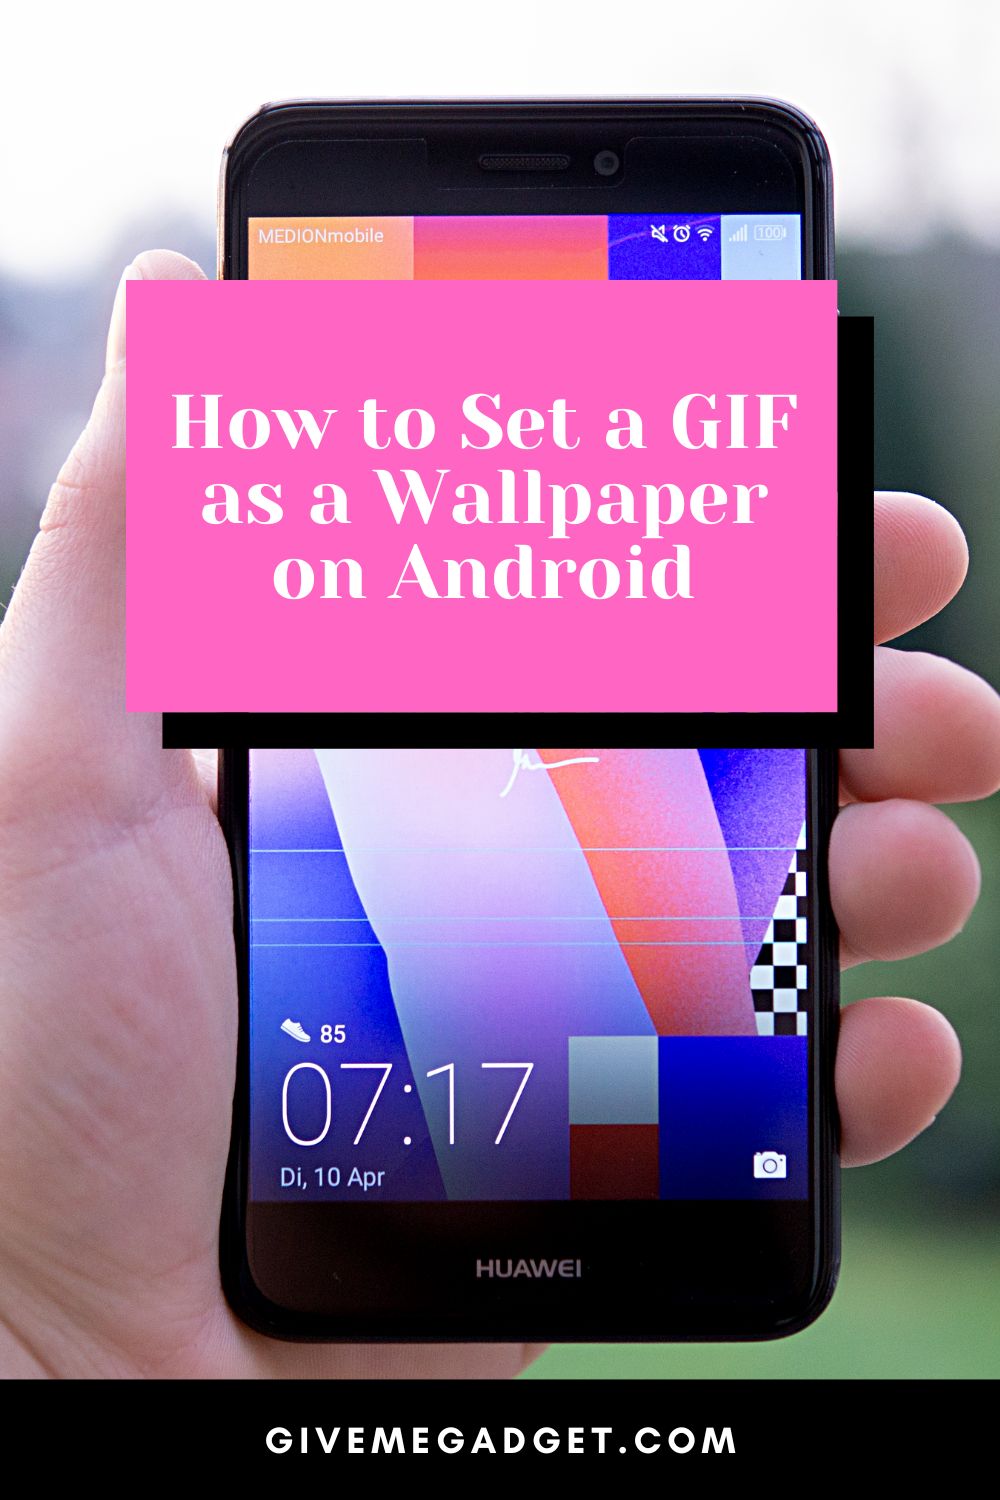 How to Set a GIF as a Wallpaper on Android